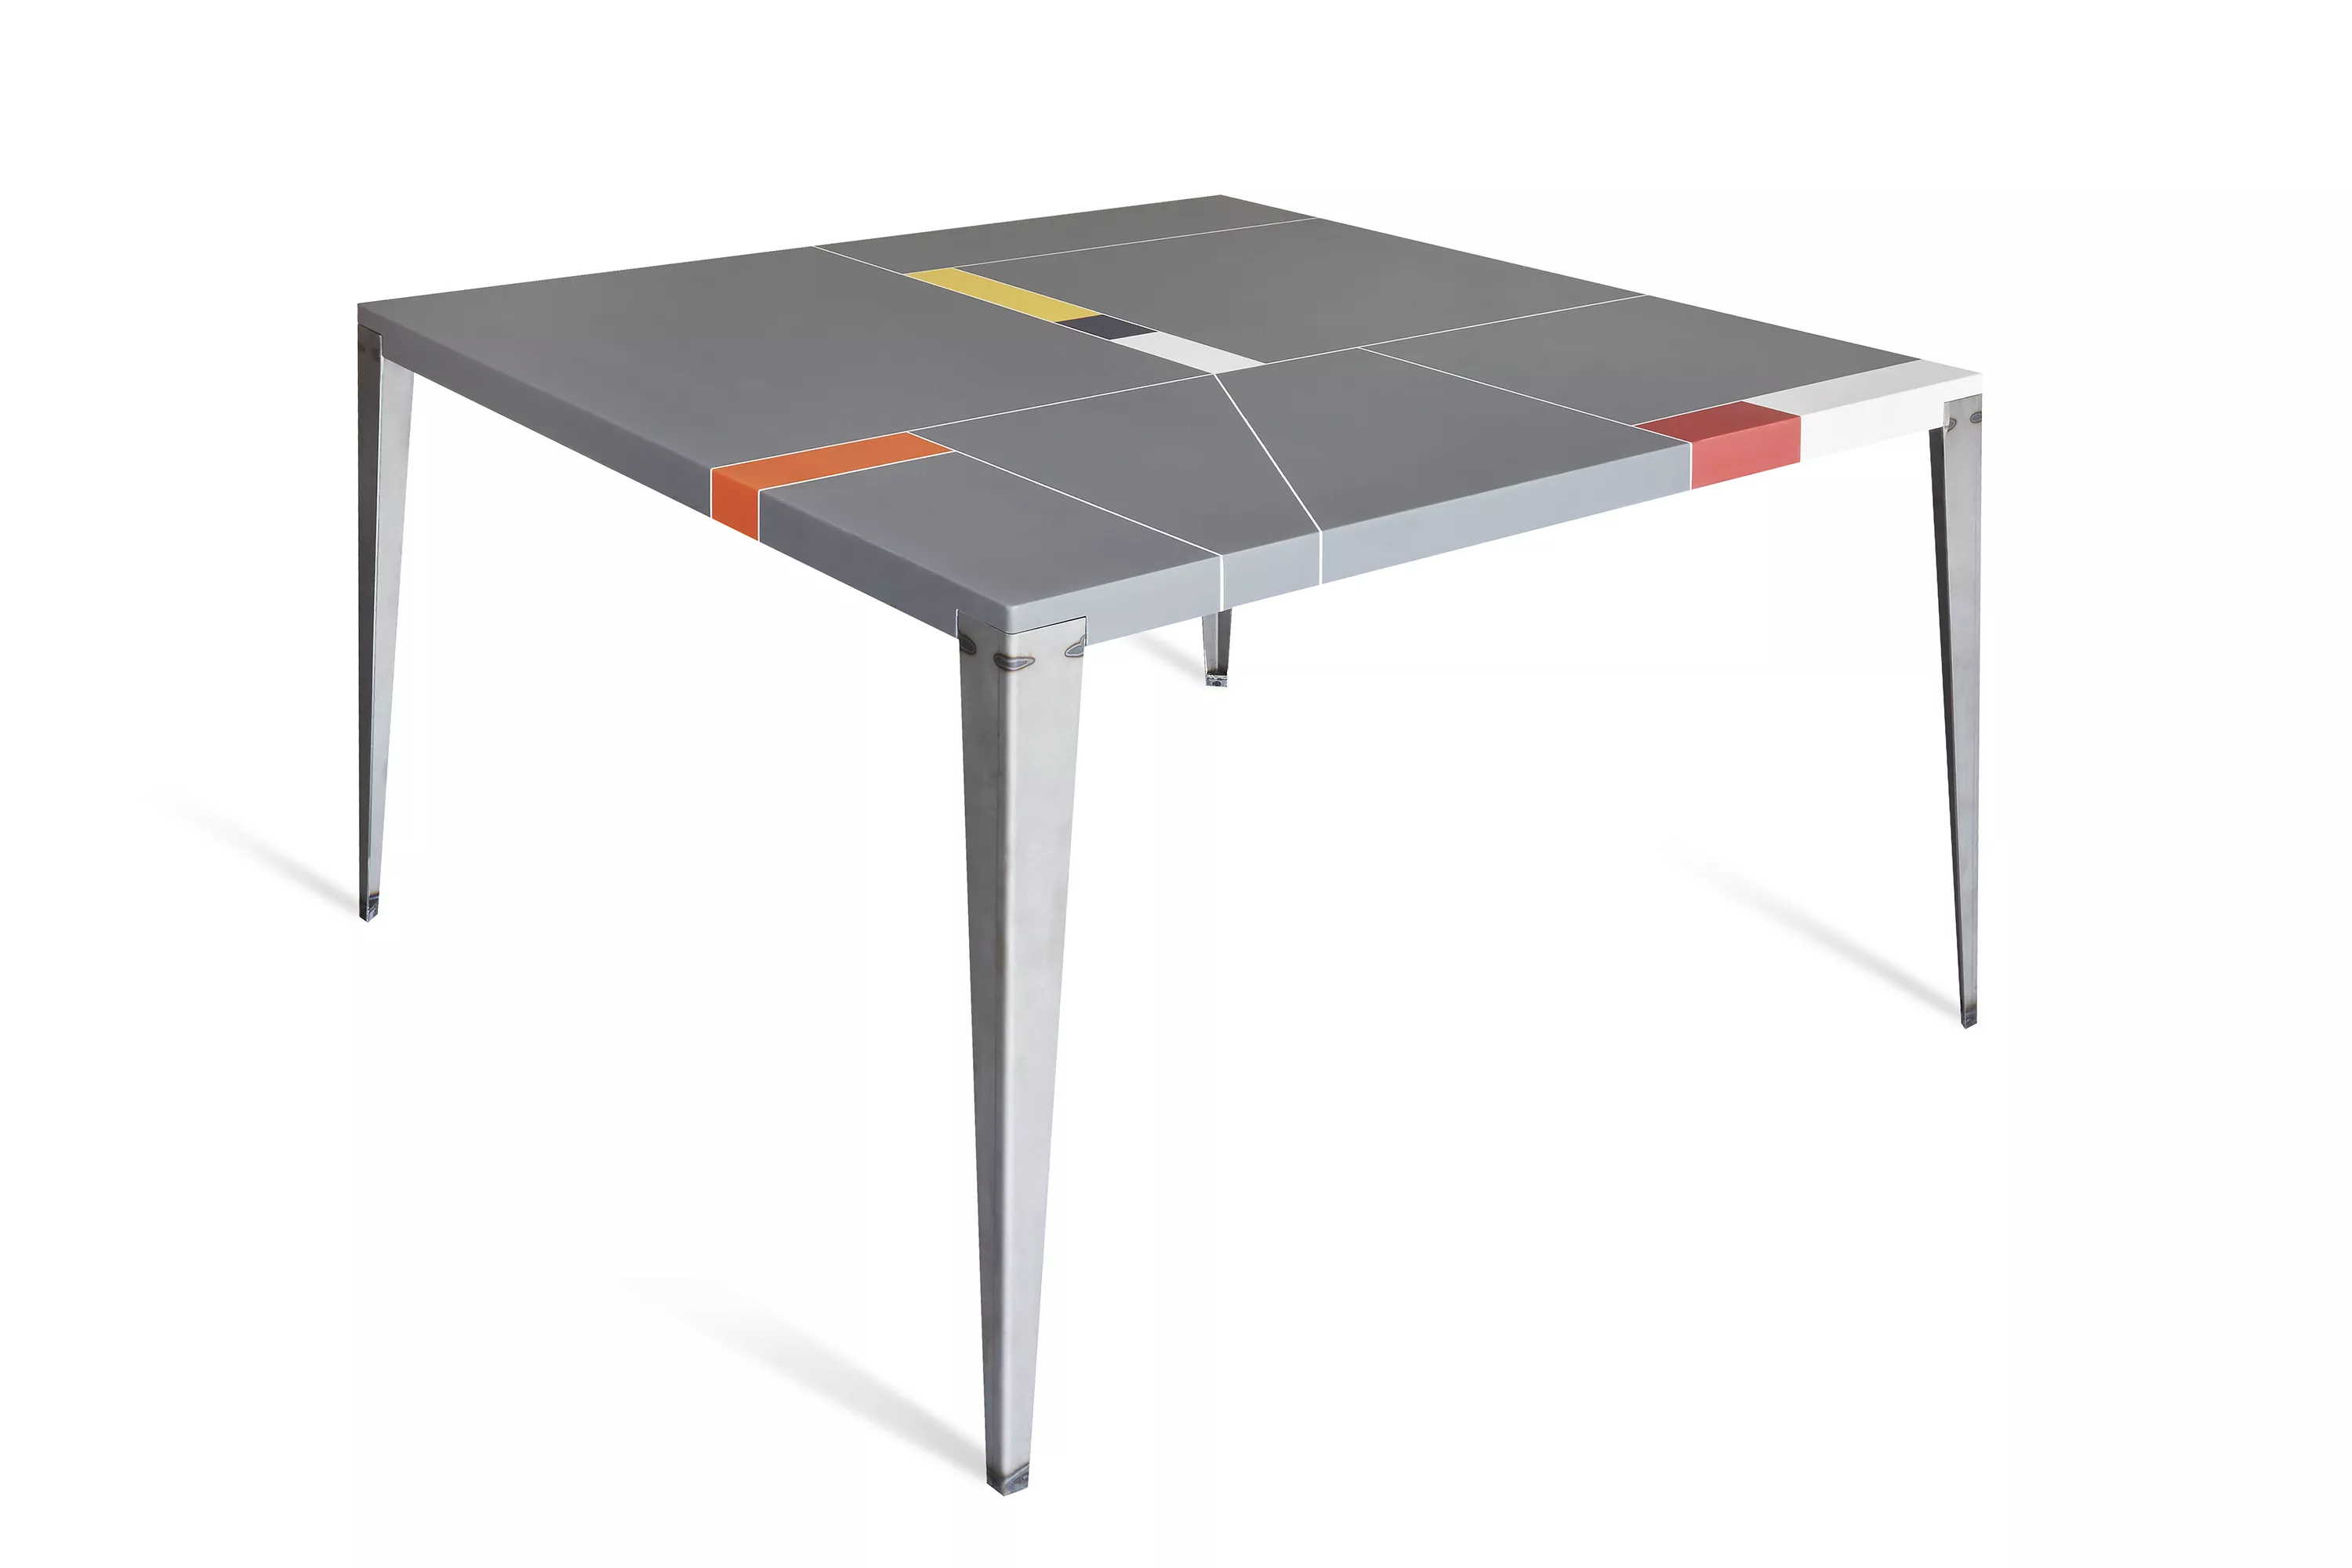 Tzero Table: The new HIMACS tables with green credentials